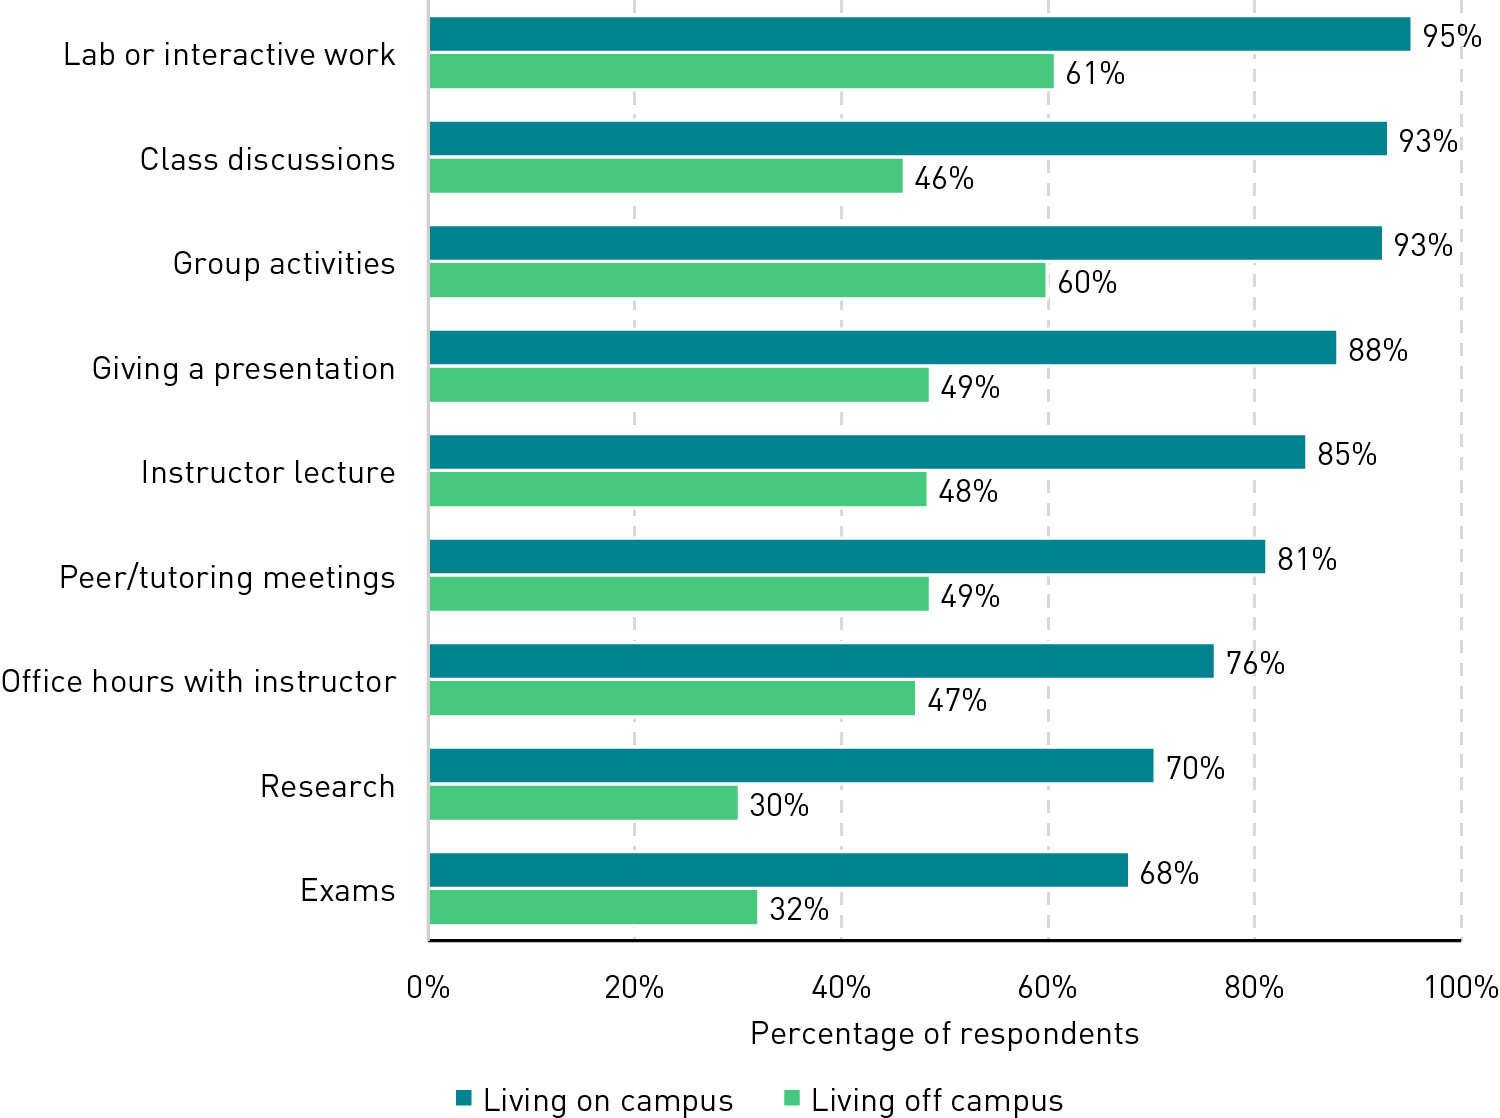 Chart showing percentages of students who prefer on-site modalities for specific learning activities, broken out by whether they live on campus or off: Lab or interactive work (95% of on-campus students prefer this activity to be on-site, compared to 61% of off-campus students); Class discussions (93% and 46%); Group activities (93% and 60%); Giving a presentation (88% and 49%); Instructor lecture (85% and 48%); Peer/tutoring meetings (81% and 49%); Office hours (76% and 47%); Research (70% and 30%); and Exams (68% and 32%)